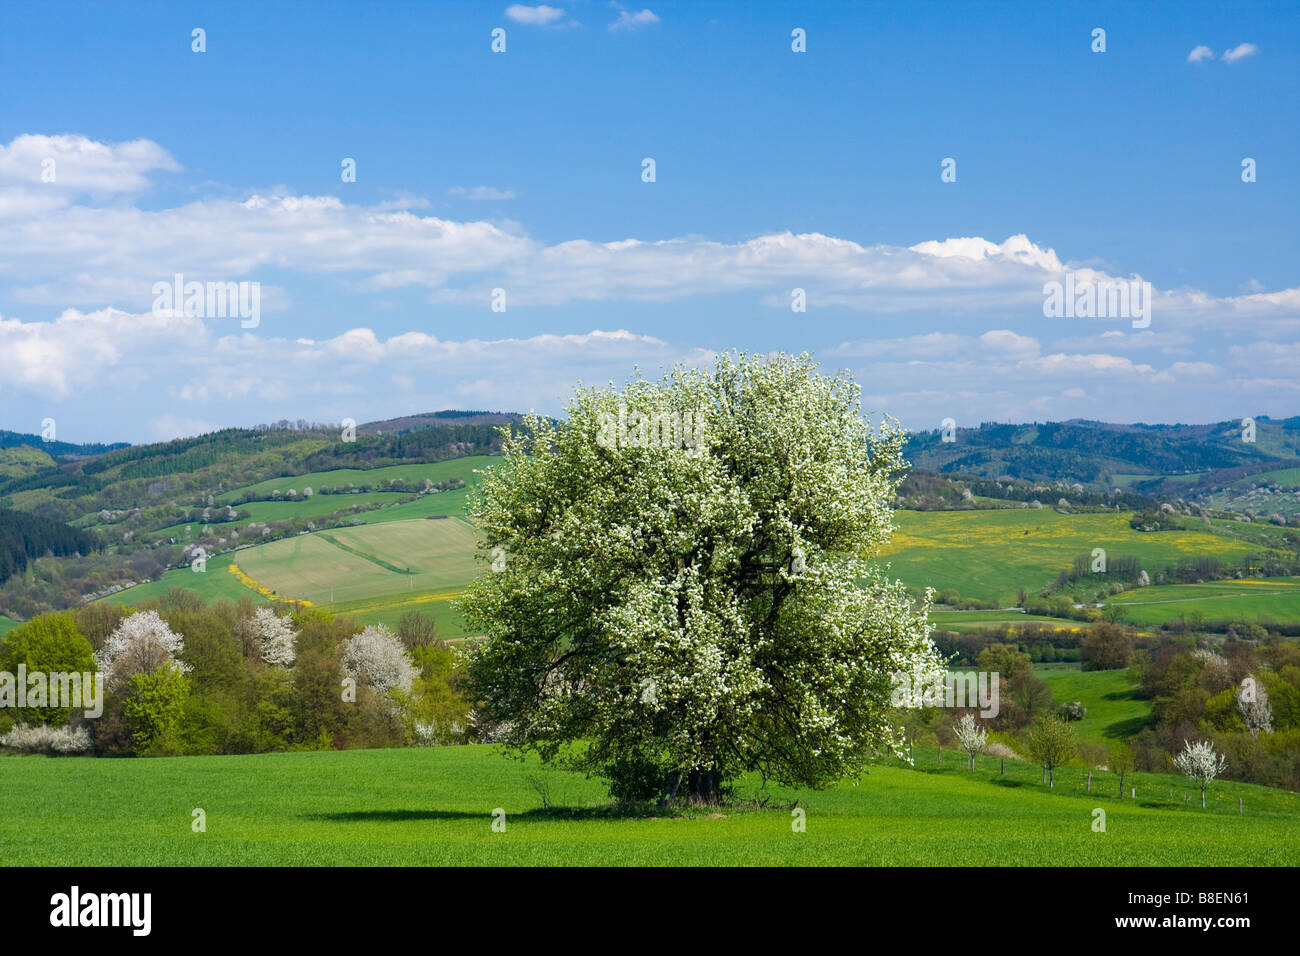 Spring landscape with flowering trees Stock Photo